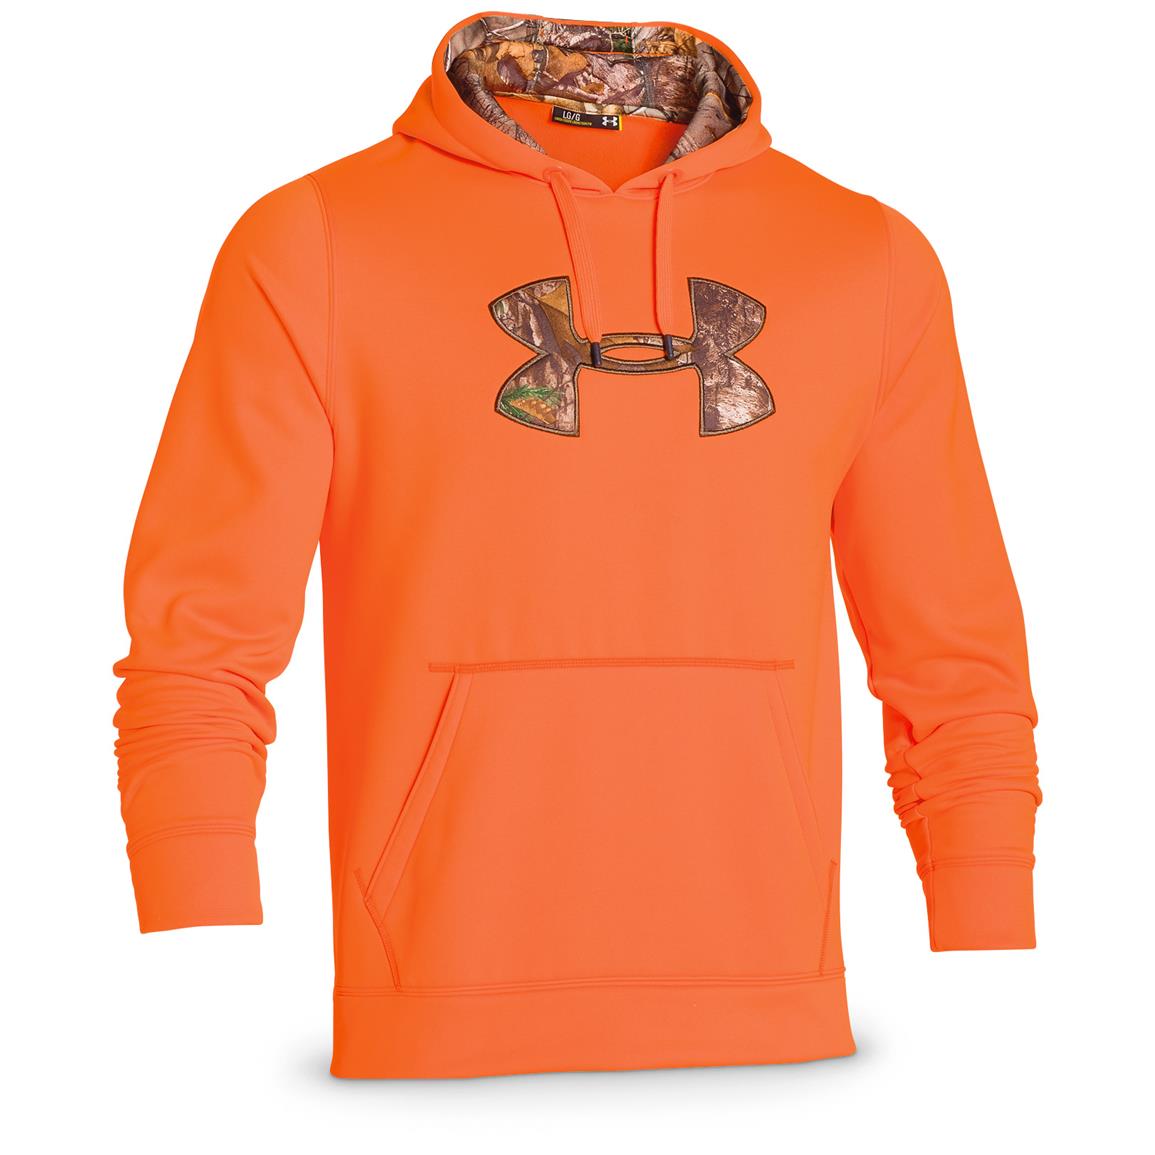 Under Armour Men's Stealth Hoodie - 666102, Camo Jackets at Sportsman's ...